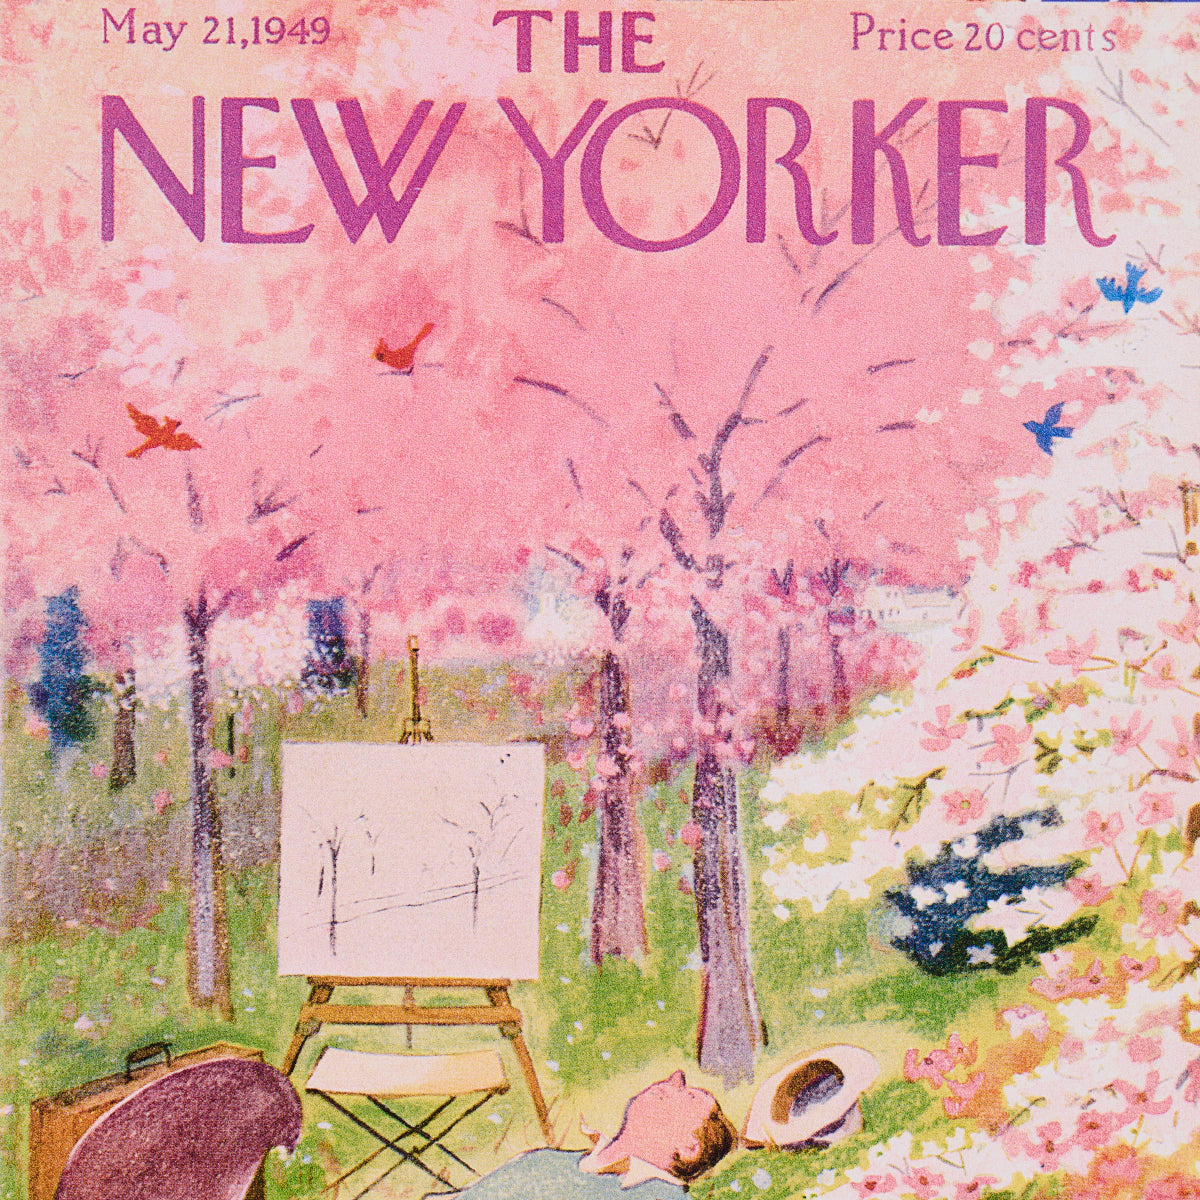 THE NEW YORKER SEASONAL COVERS | MULTICOLOR